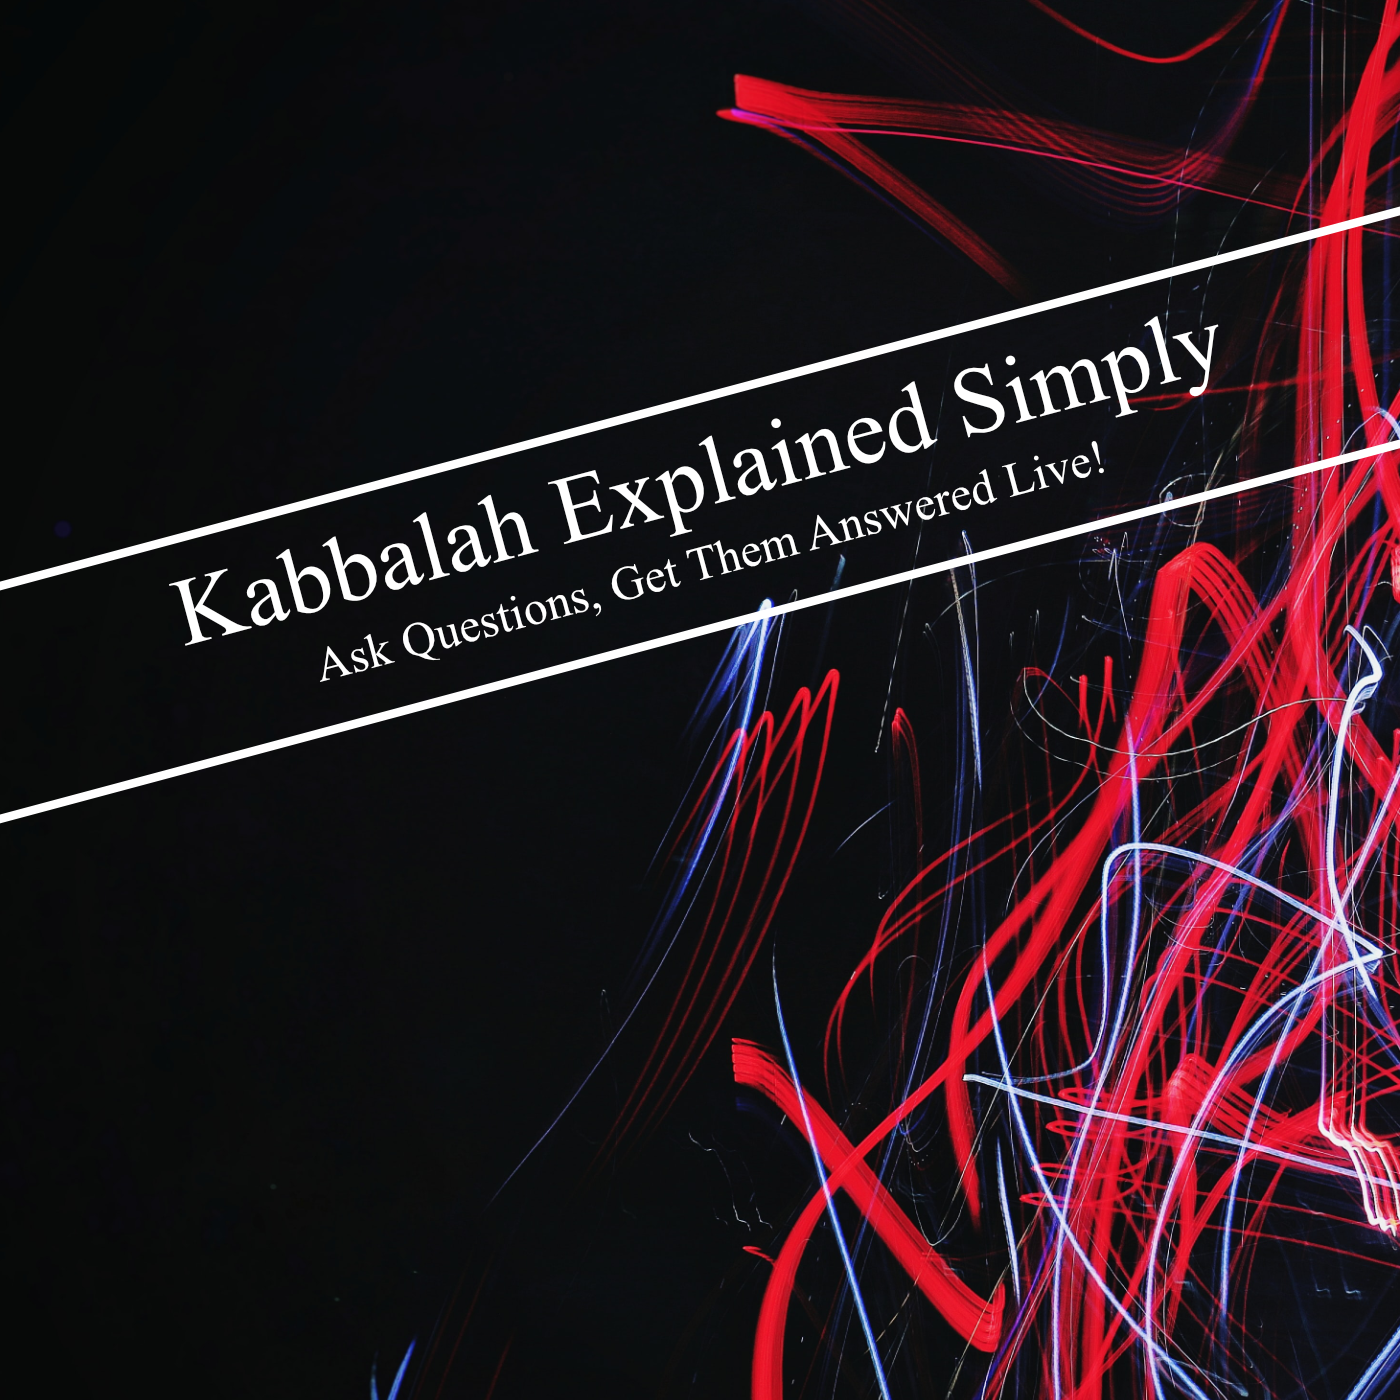 Kabbalah Explained Simply - Ask Questions, Get Them Answered Live!